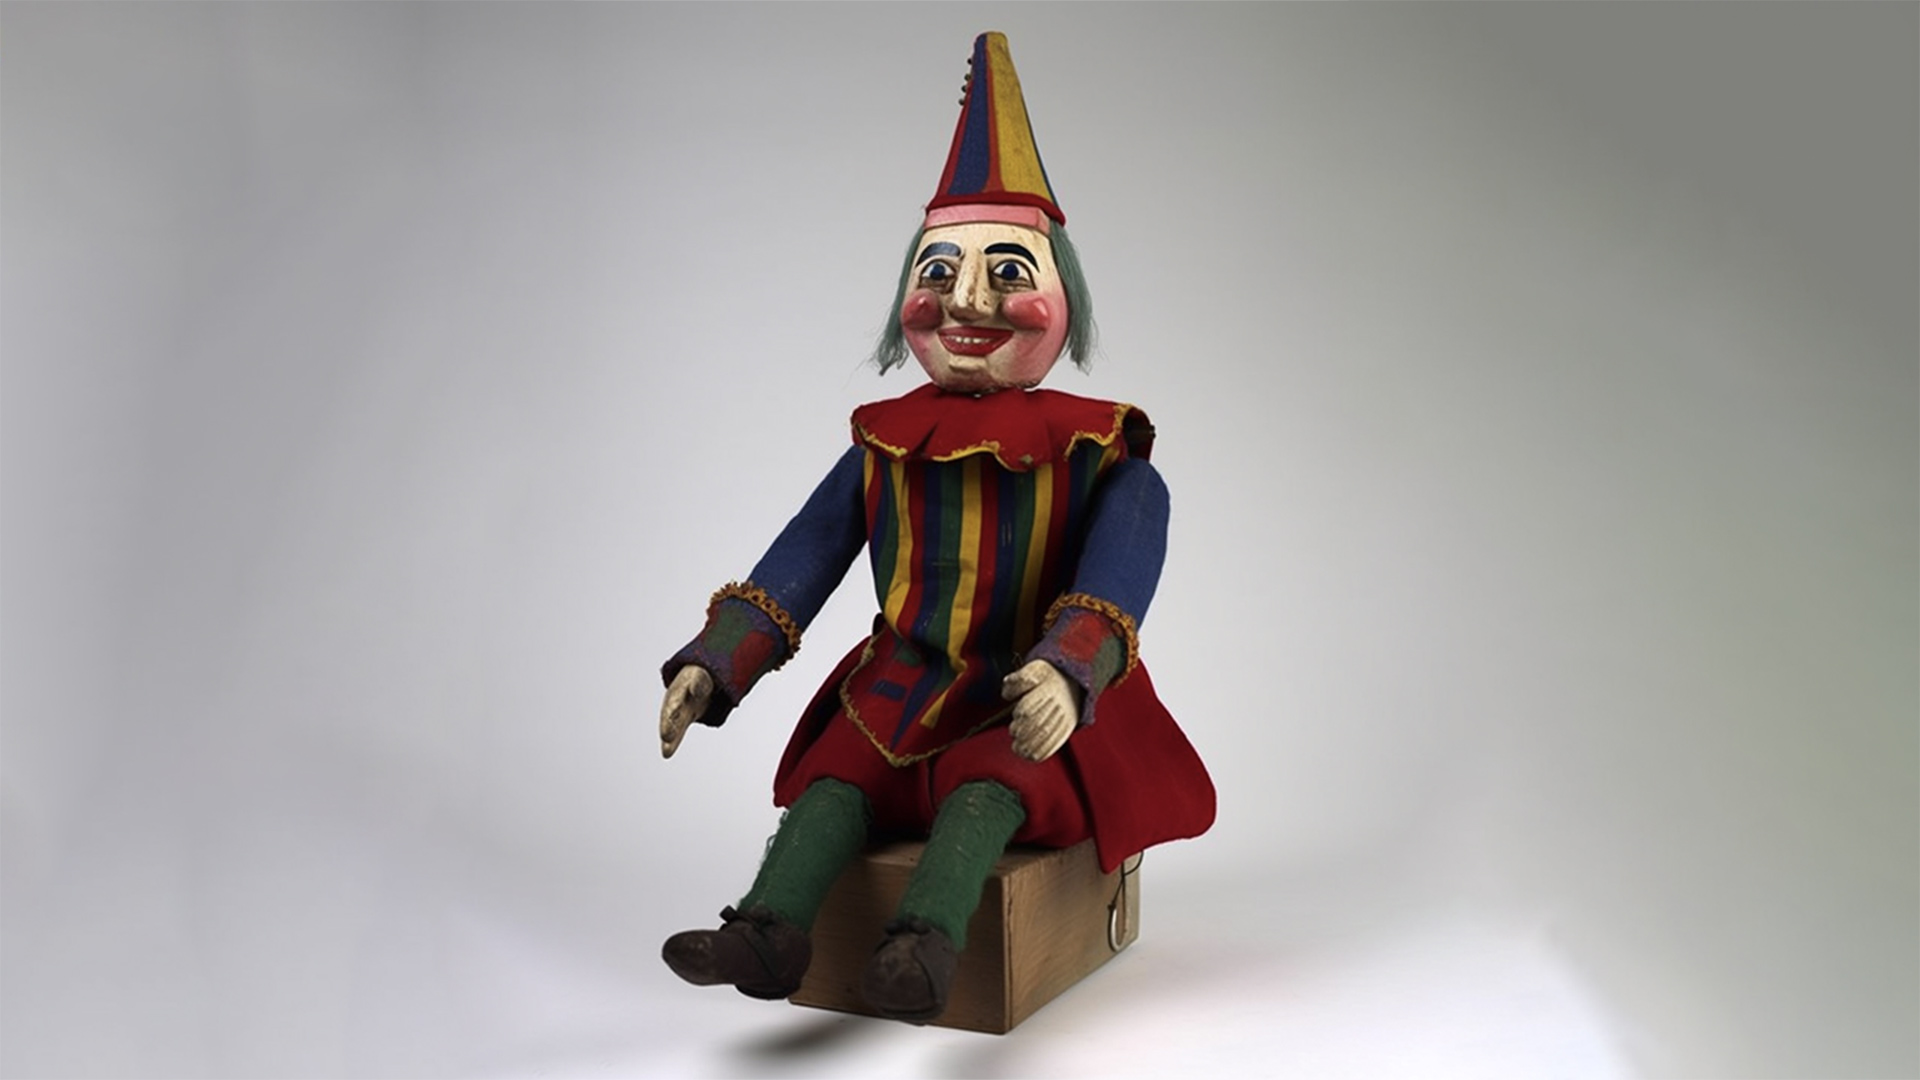 Seated puppet of Mr Punch